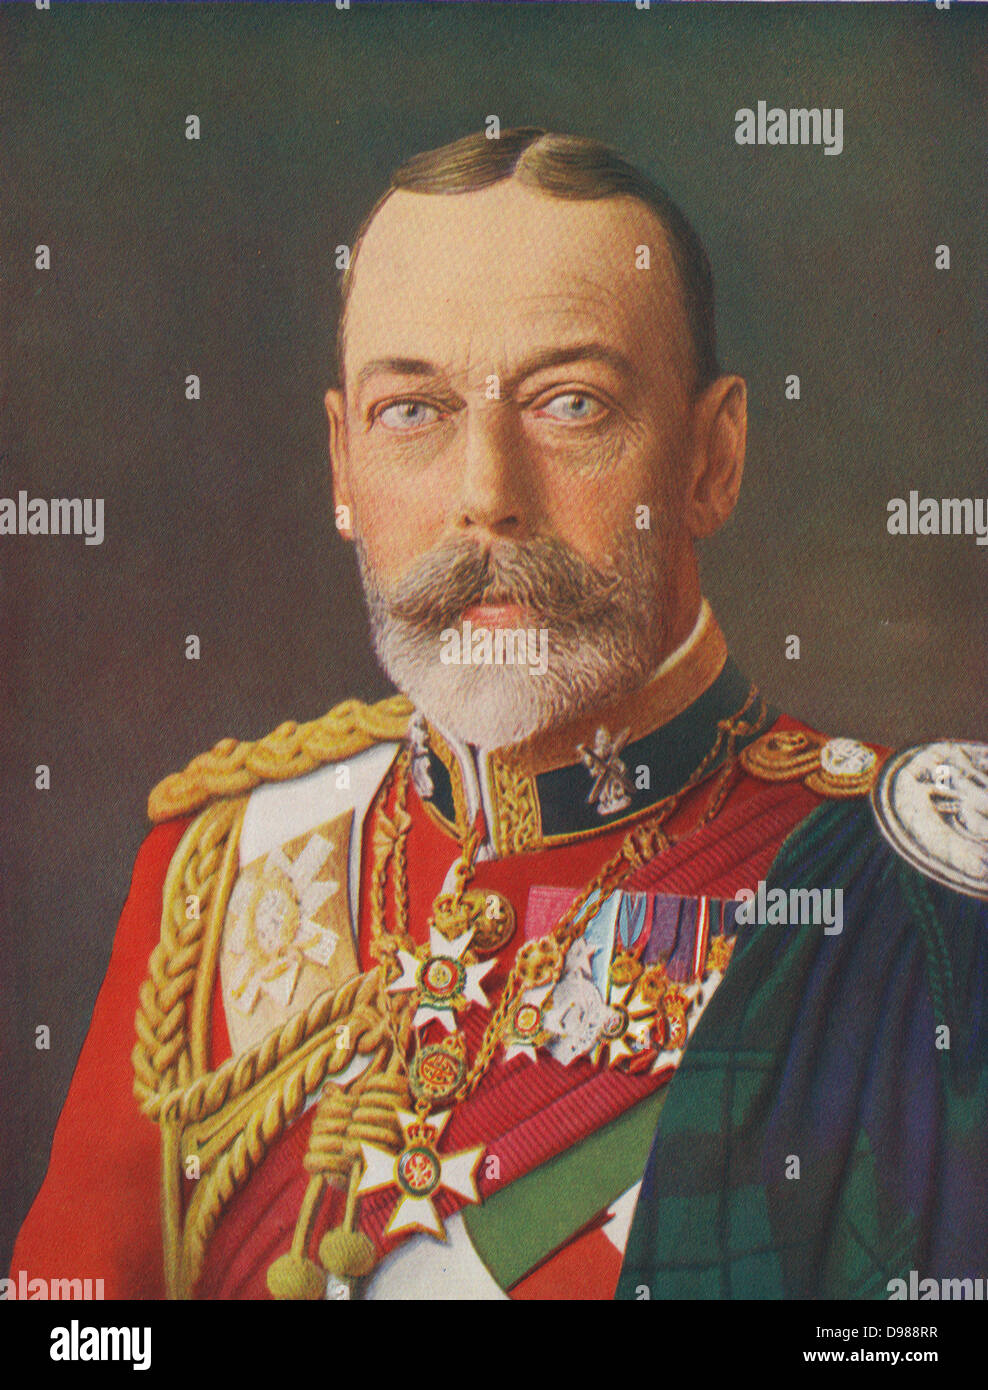 George V (1865-1936), King of the United Kingdom and Emperor of India 1910-1936. Stock Photo